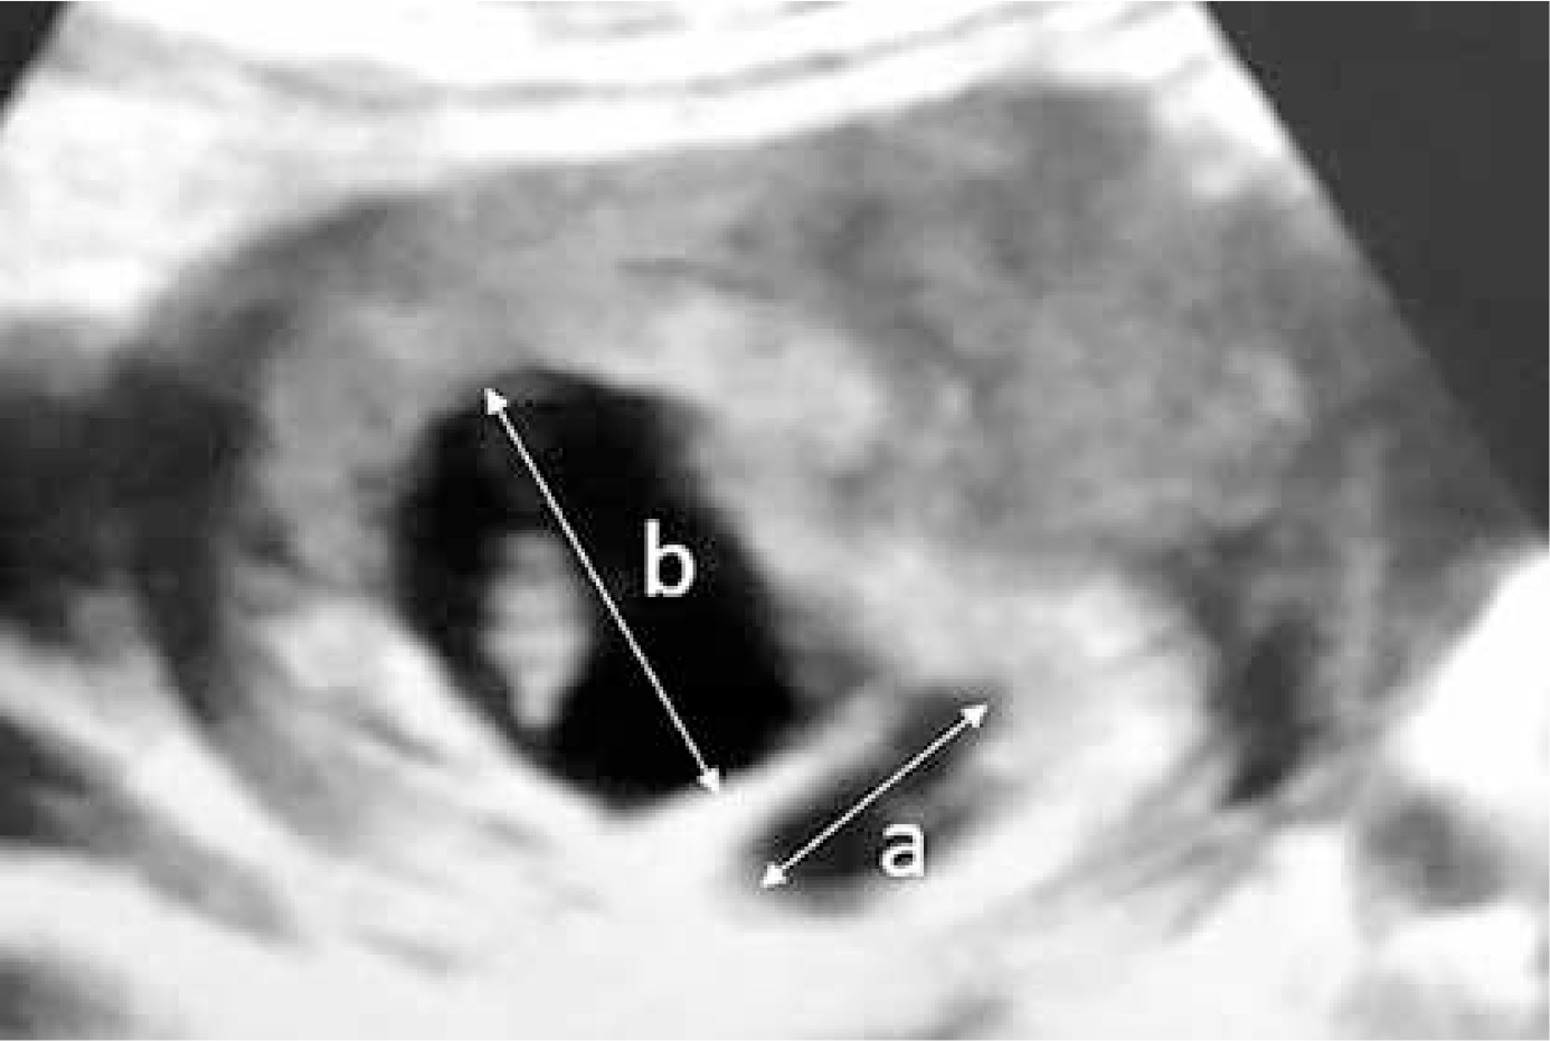 How Does Subchorionic Hematoma In The First Trimester Affect Pregnancy